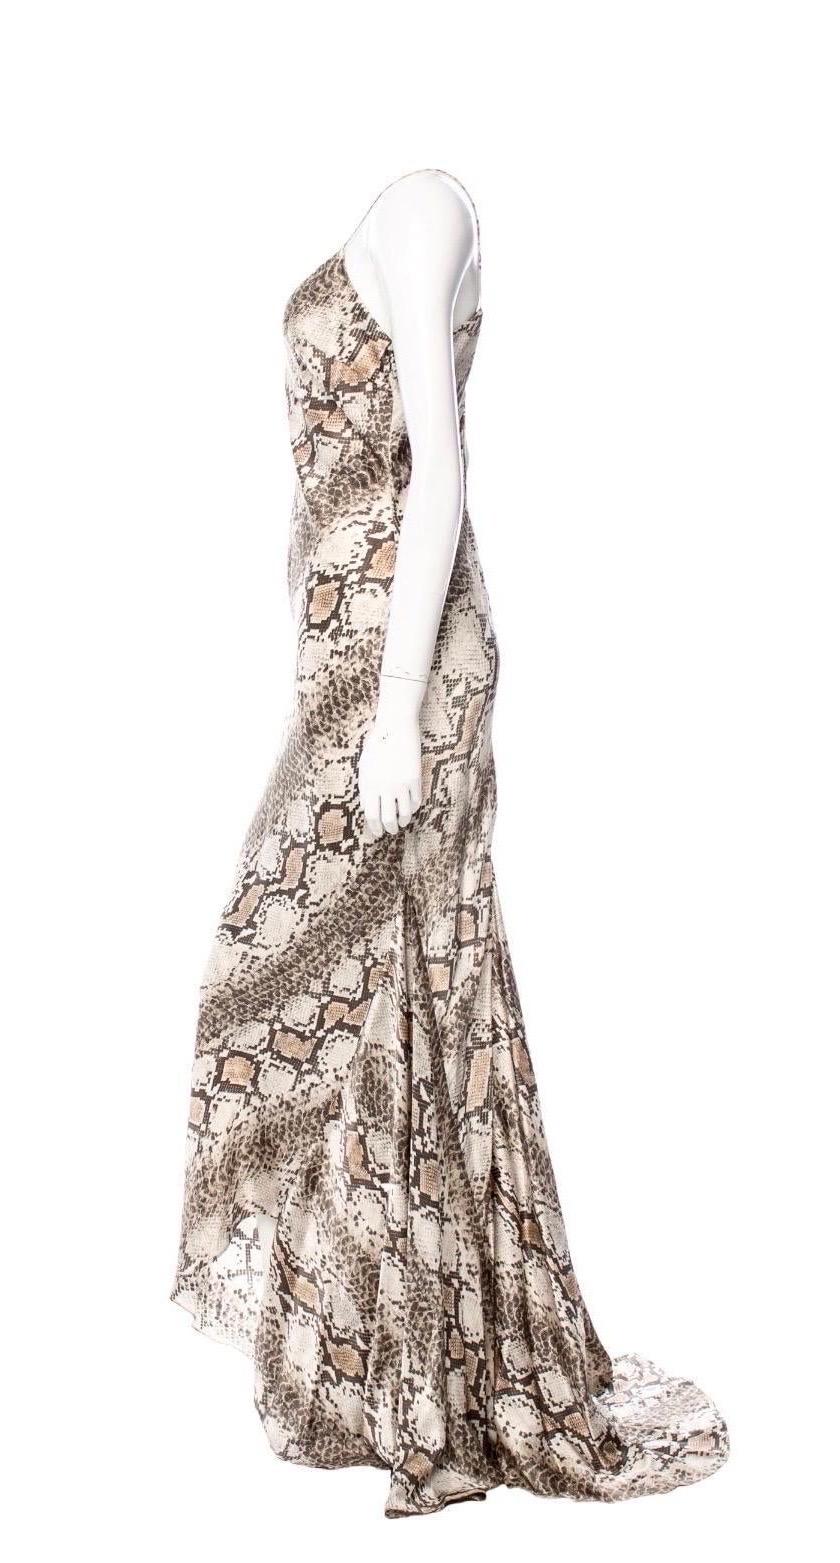 A beautiful ROBERTO CAVALLI evening gown that will last you for years
From the most prestigious ROBERTO CAVALLI main line
Made out of most beautiful fabric with exotic snakeskin animal print
Fabric is discreetly signed with 